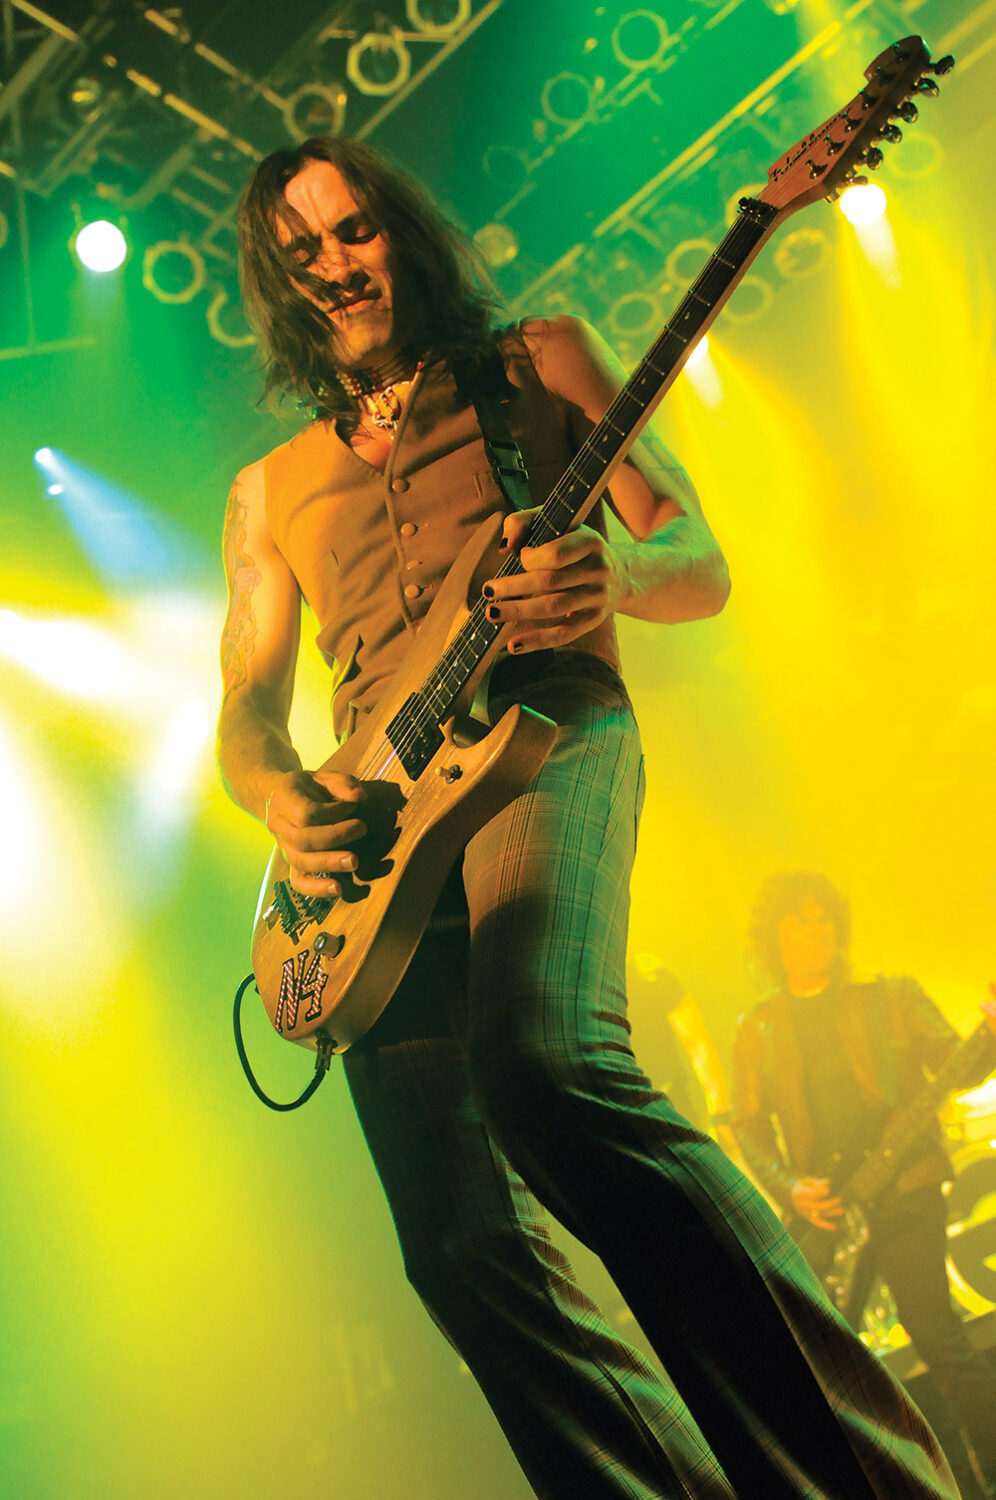 Nuno Bettencourt on stage with N4 guitar